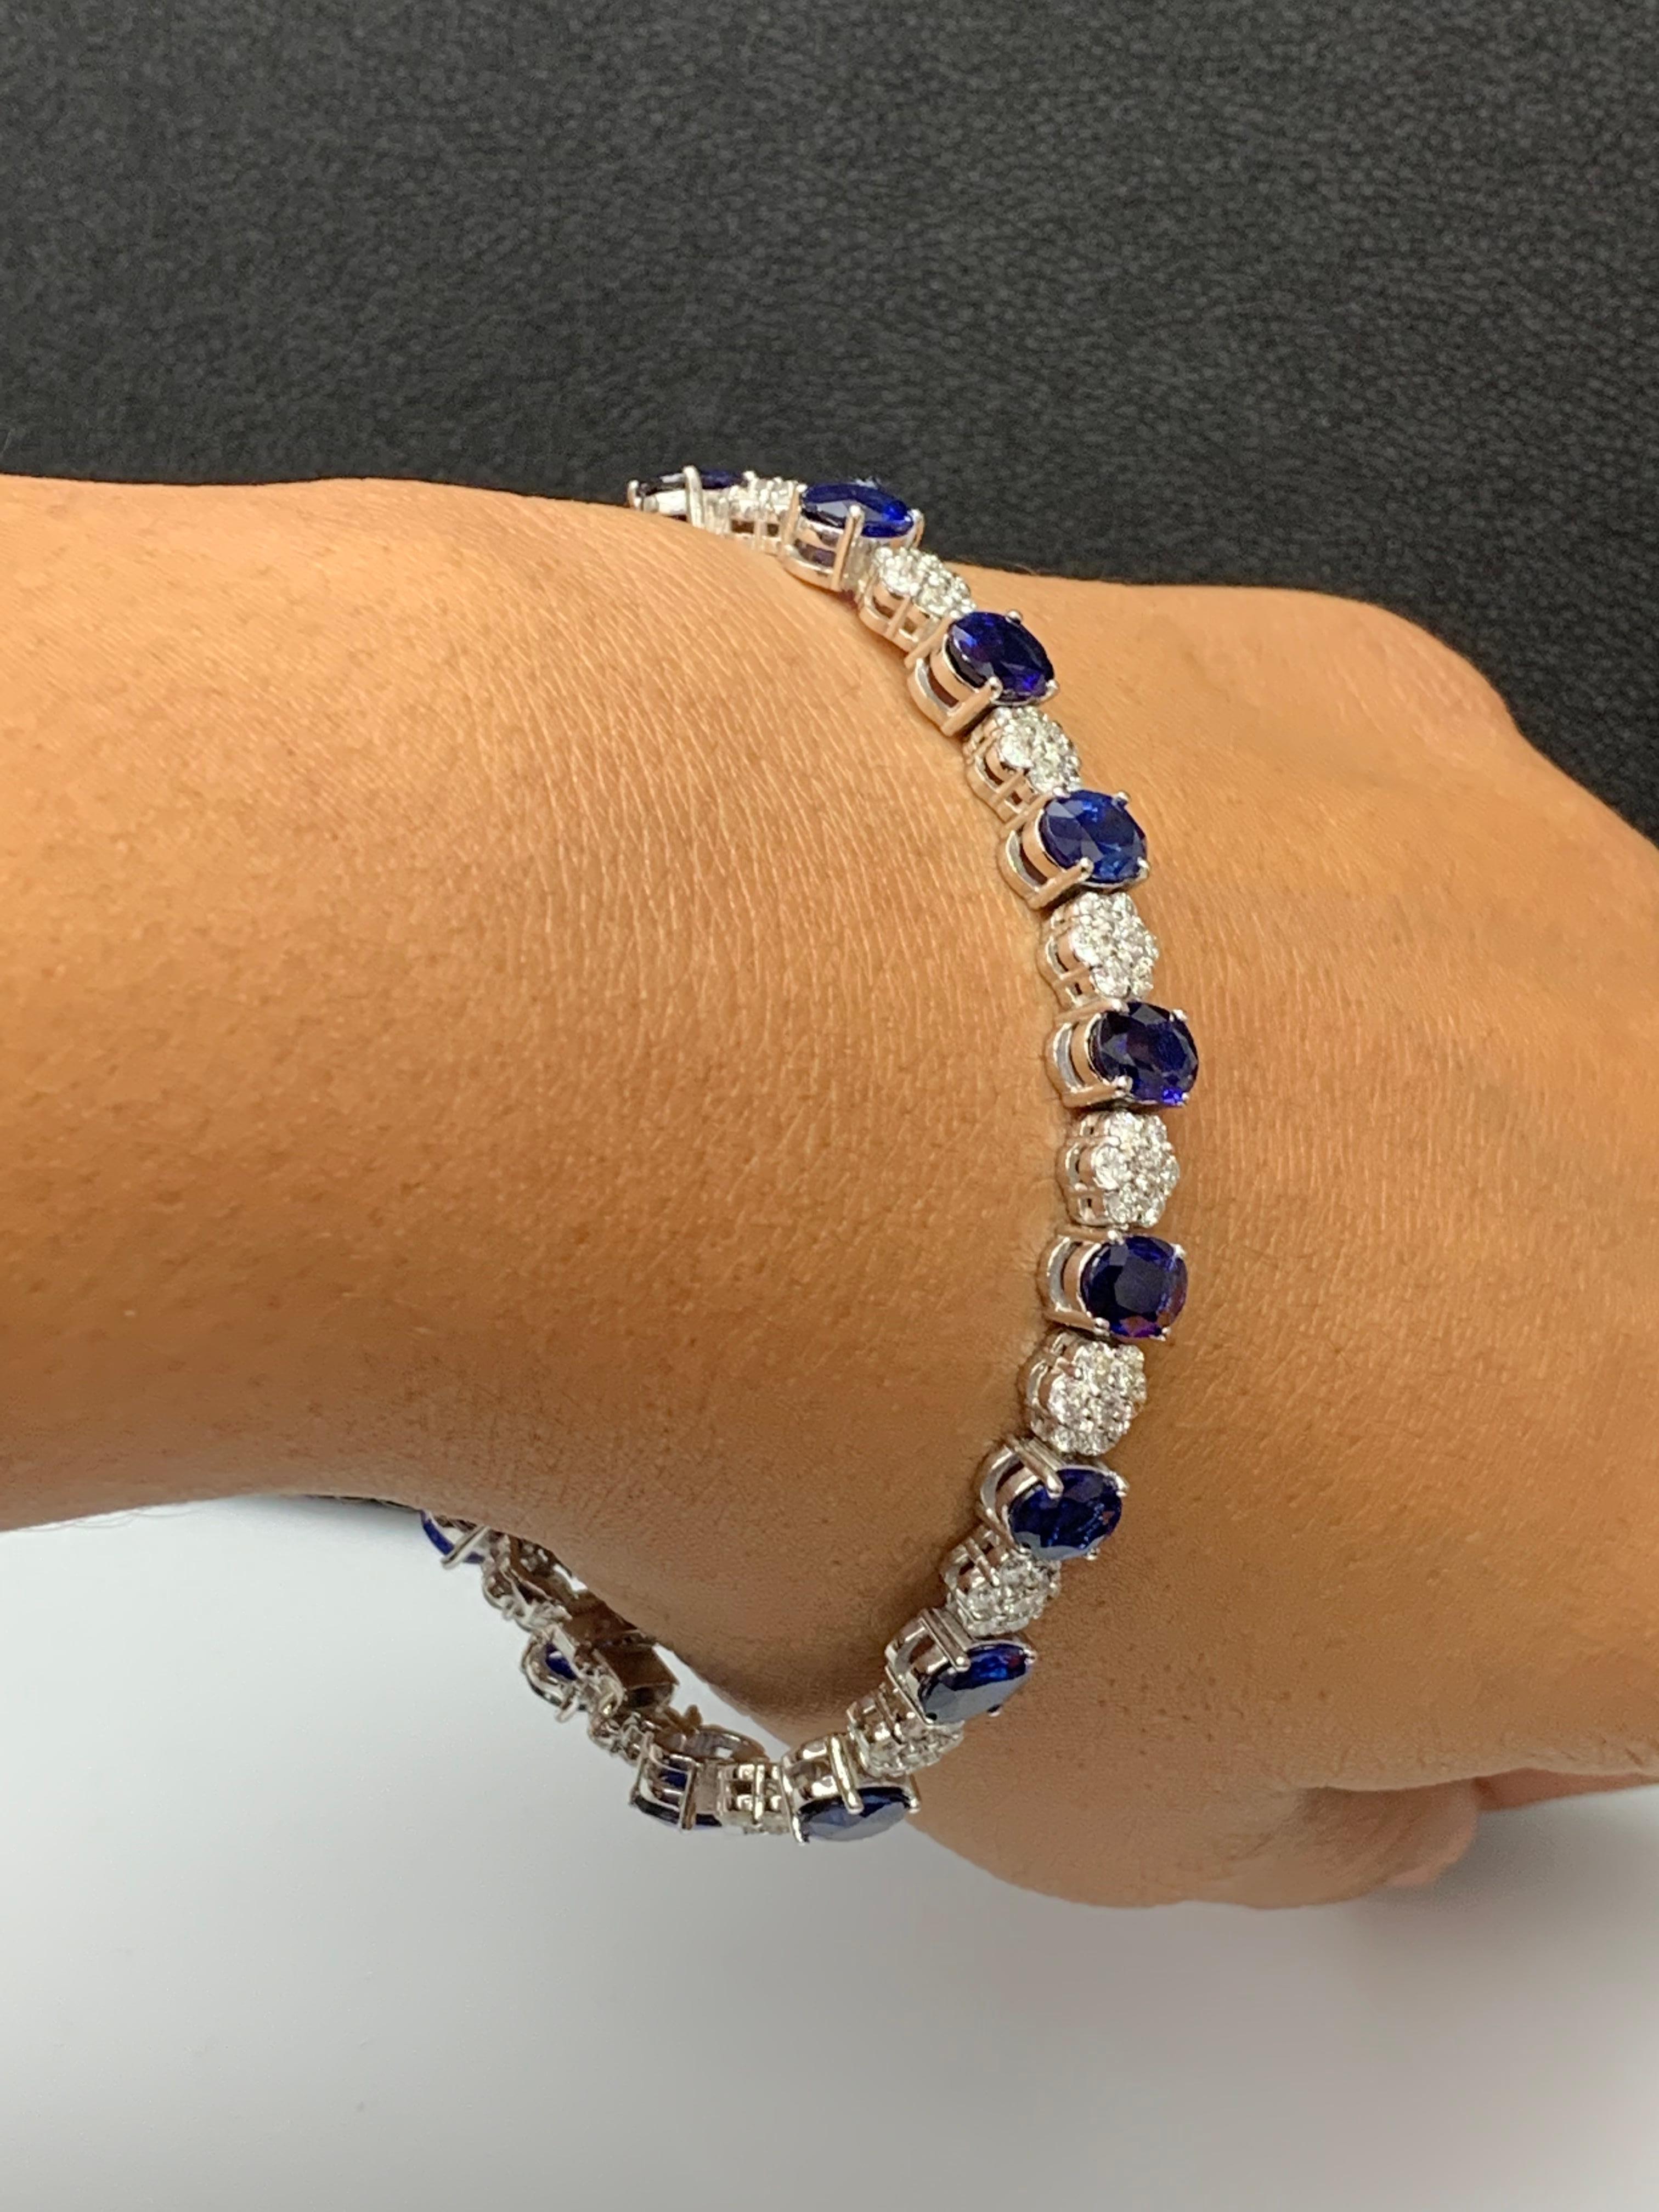 15.26 Carat Oval Cut Blue Sapphire and Diamond Tennis Bracelet in 14K White Gold For Sale 4